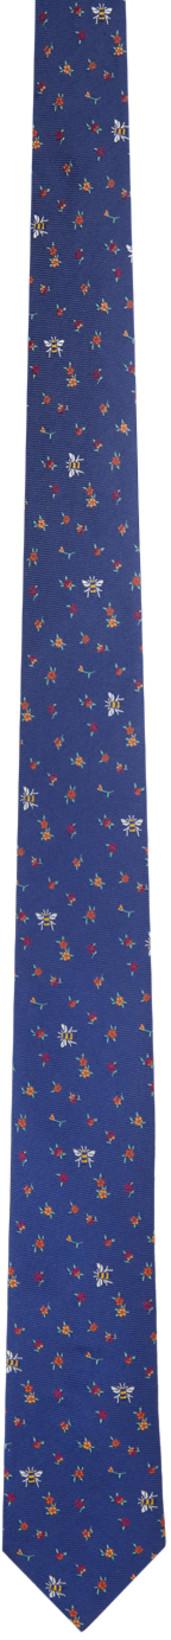 Blue Silk Floral Tie by PAUL SMITH